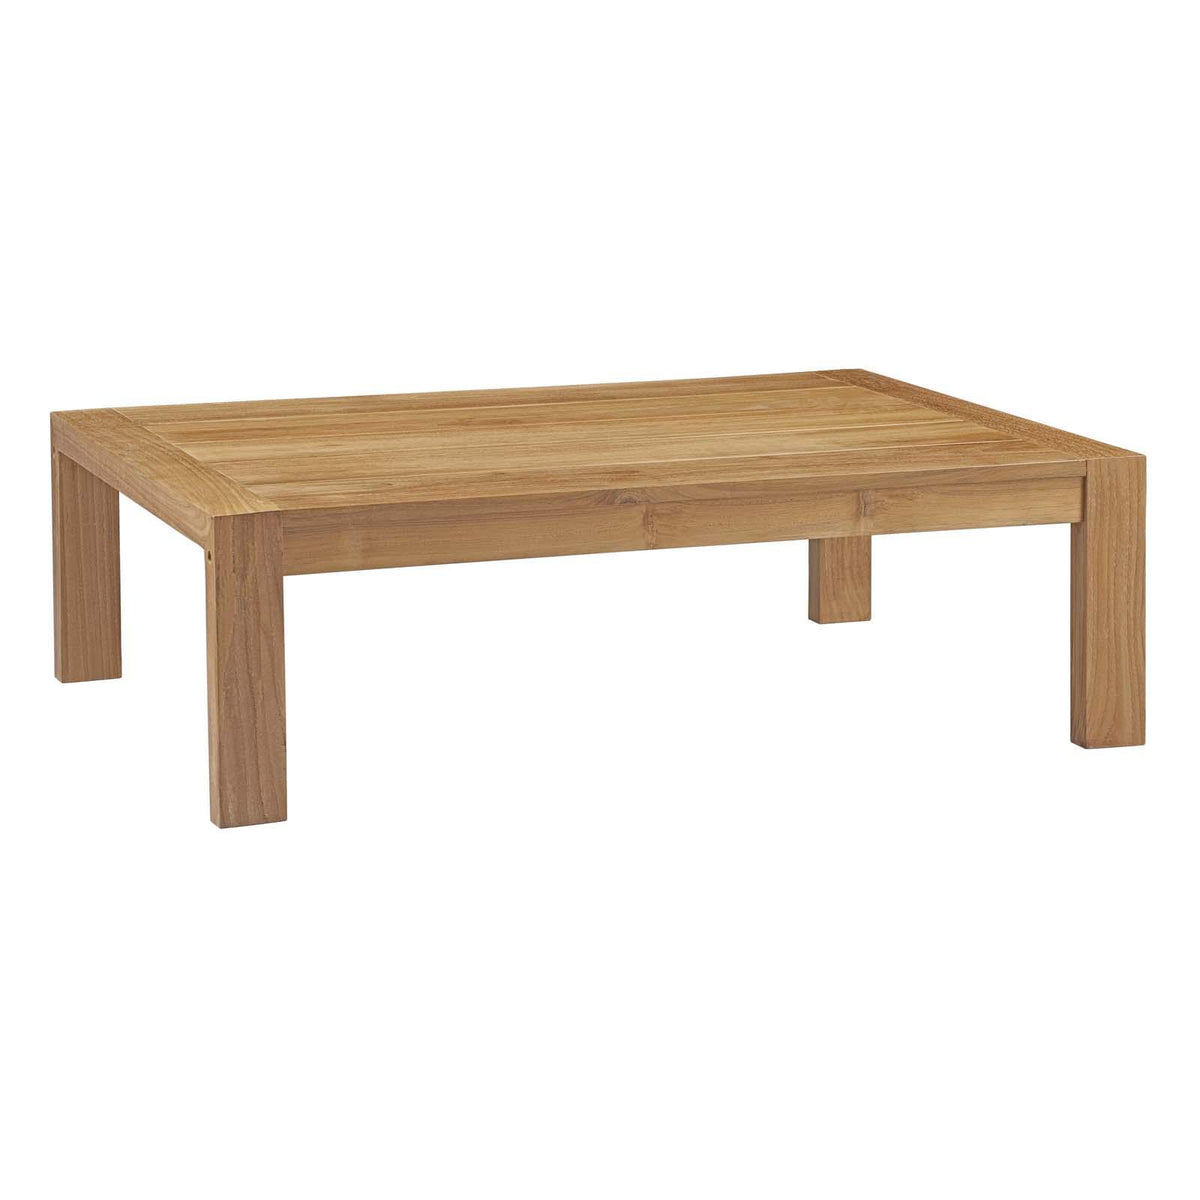 Modway Furniture Modern Upland Outdoor Patio Wood Coffee Table - EEI-2710